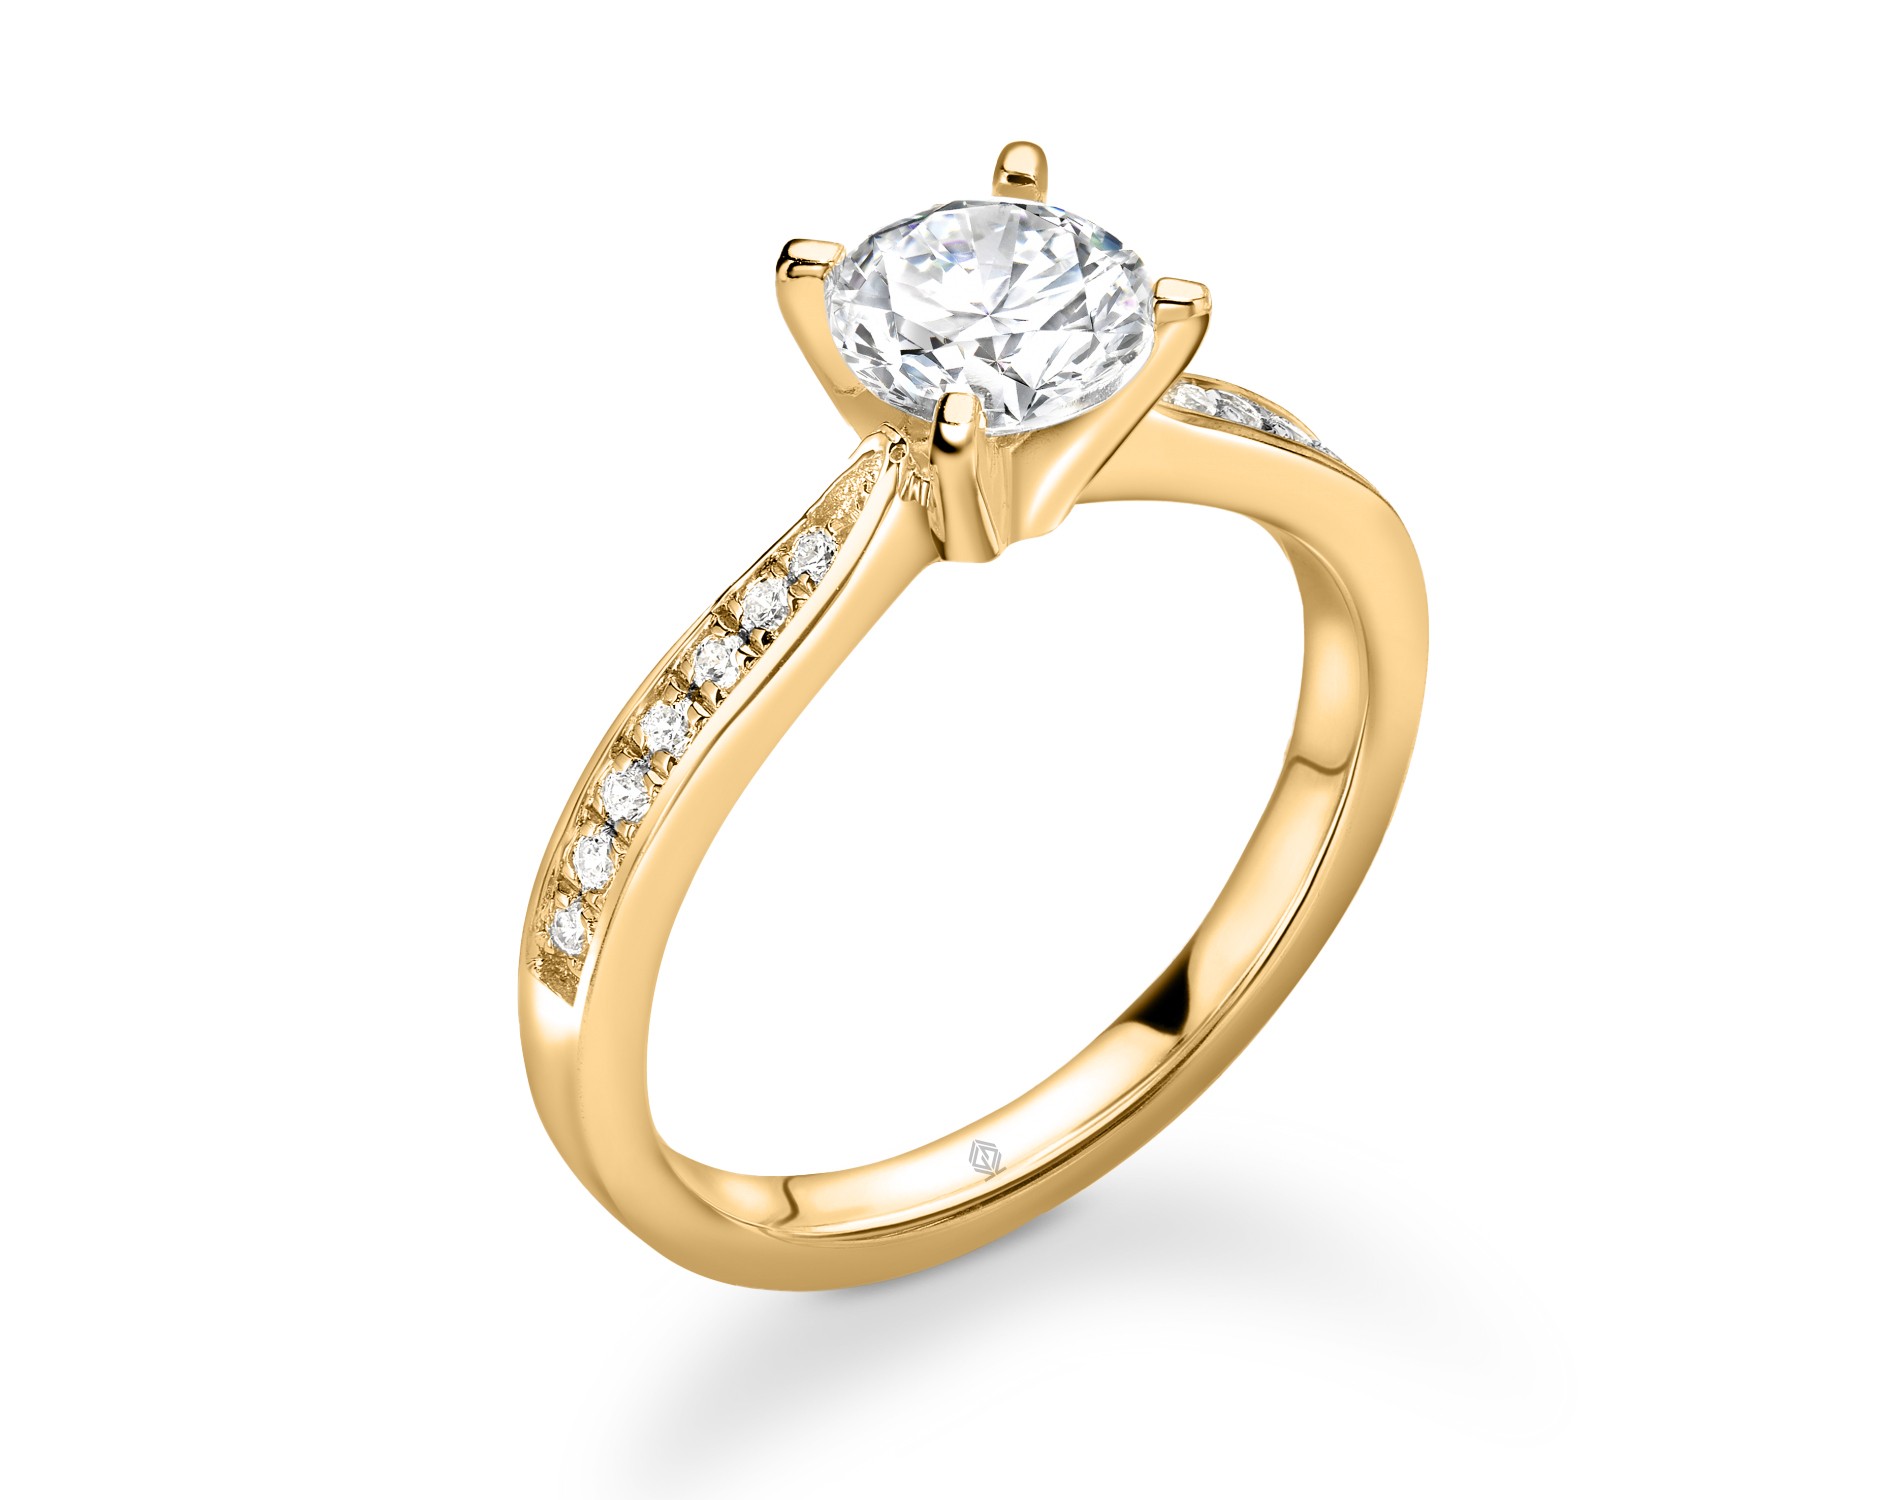 18K YELLOW GOLD 4 PRONGS ROUND CUT DIAMOND ENGAGEMENT RING WITH SIDE STONES CHANNEL SET